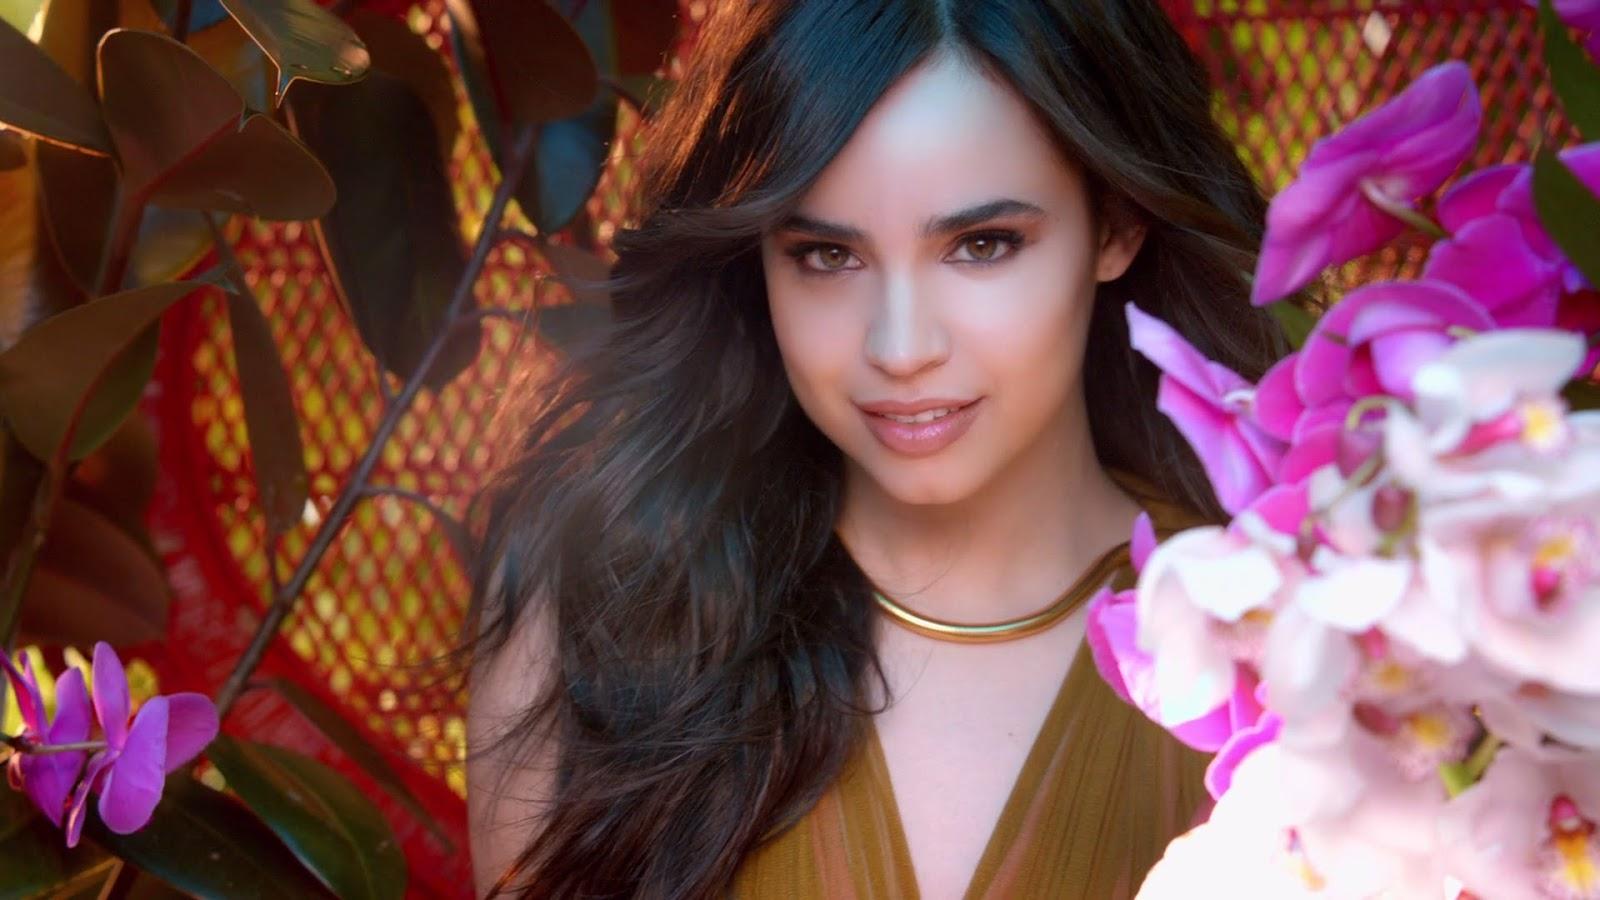 sofia carson feel the beat wallpapers wallpaper cave on sofia carson wallpapers